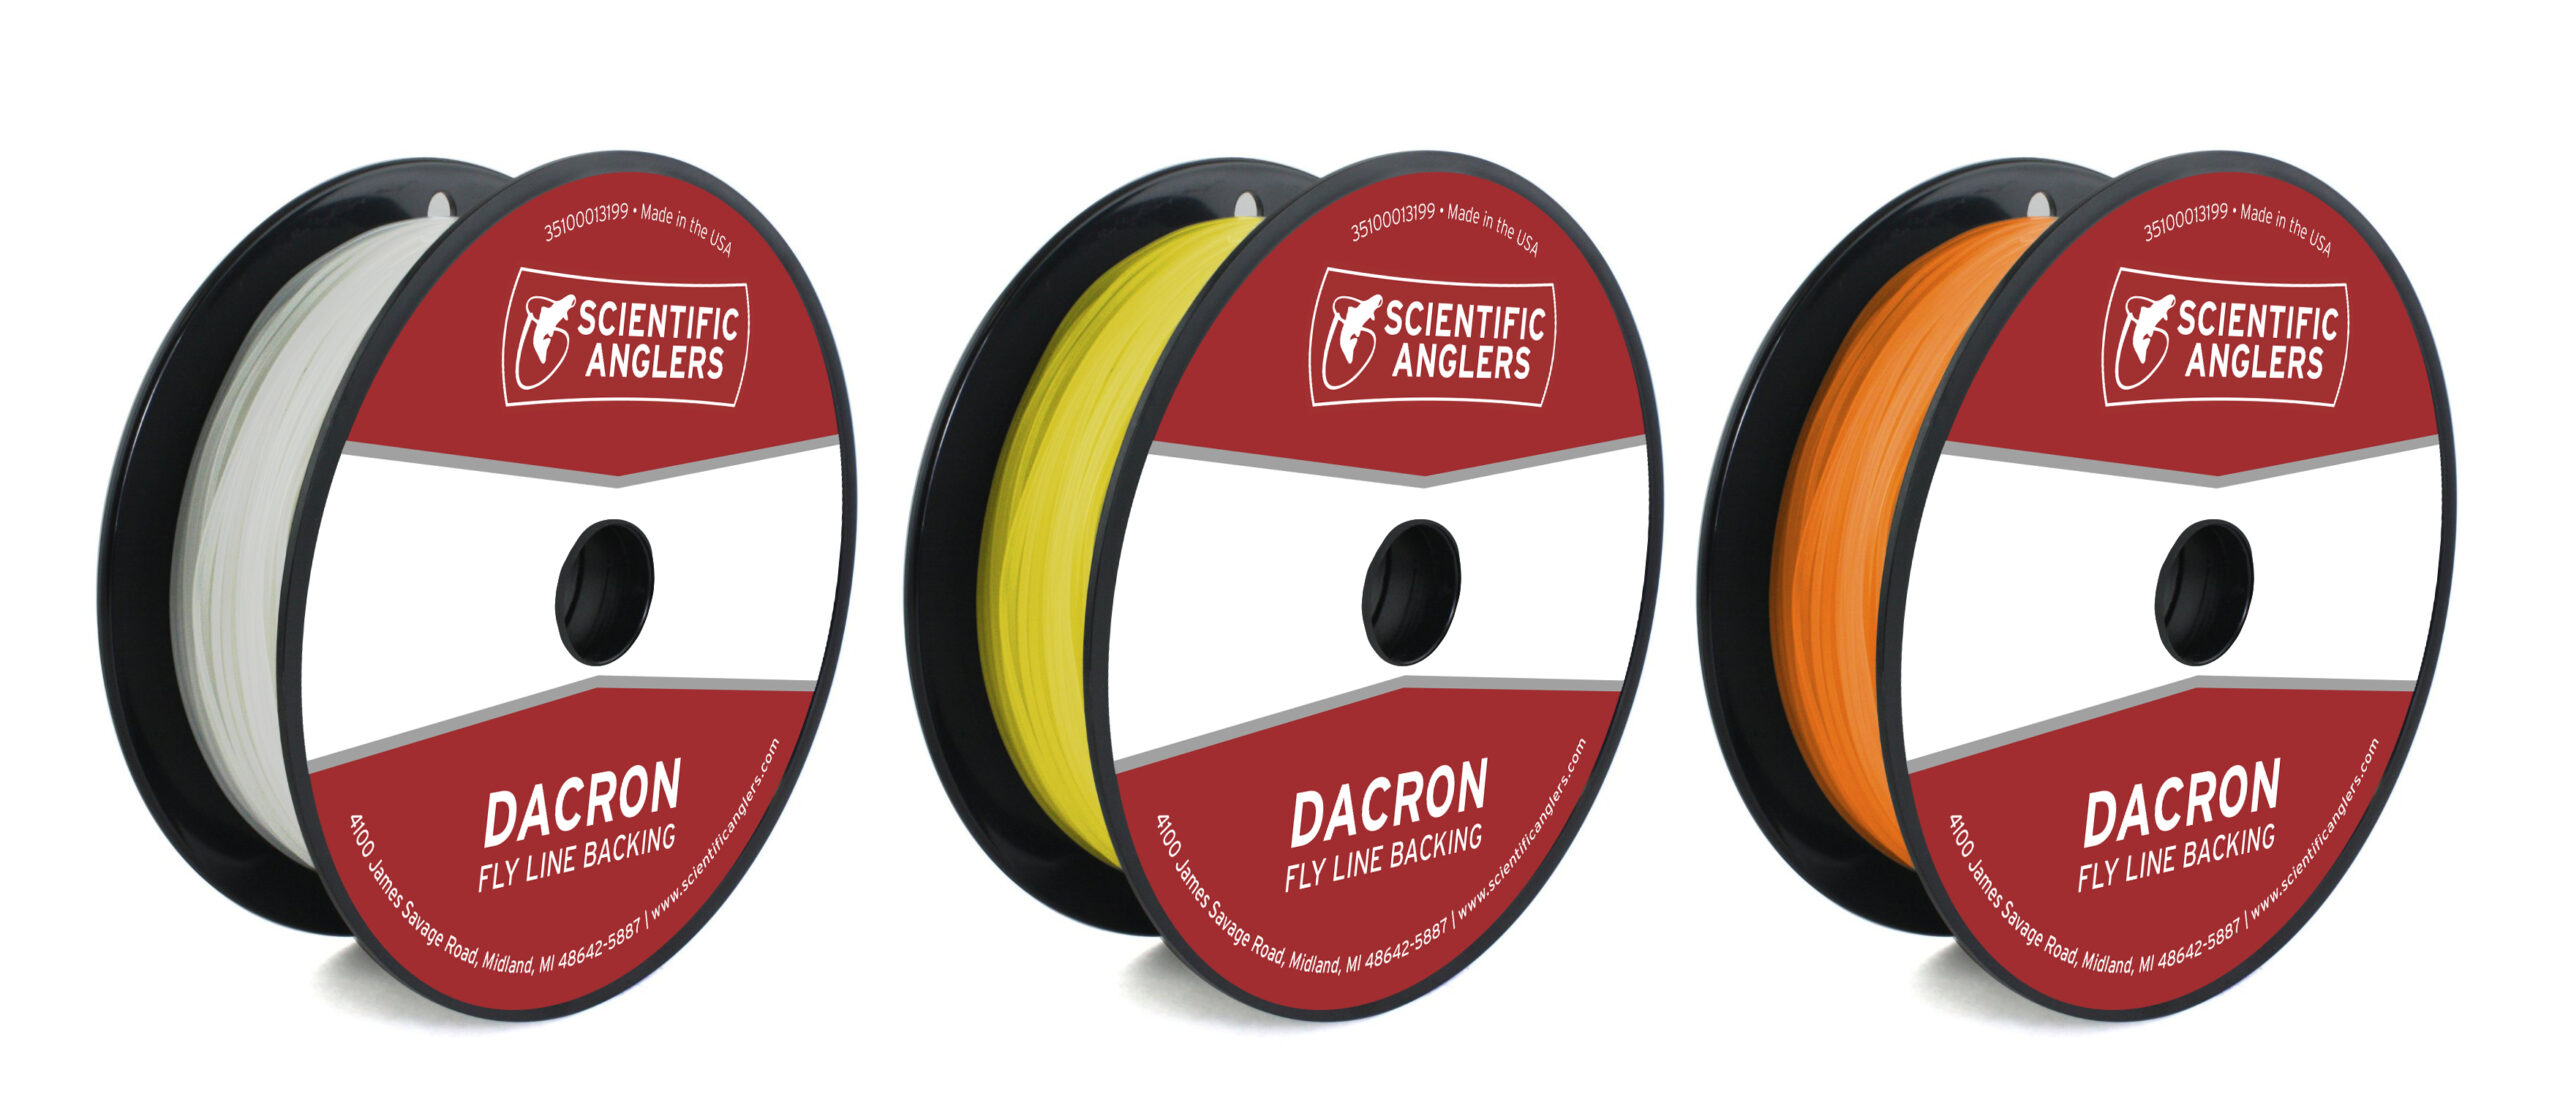 Backing Dacron - Buenos Aires Anglers